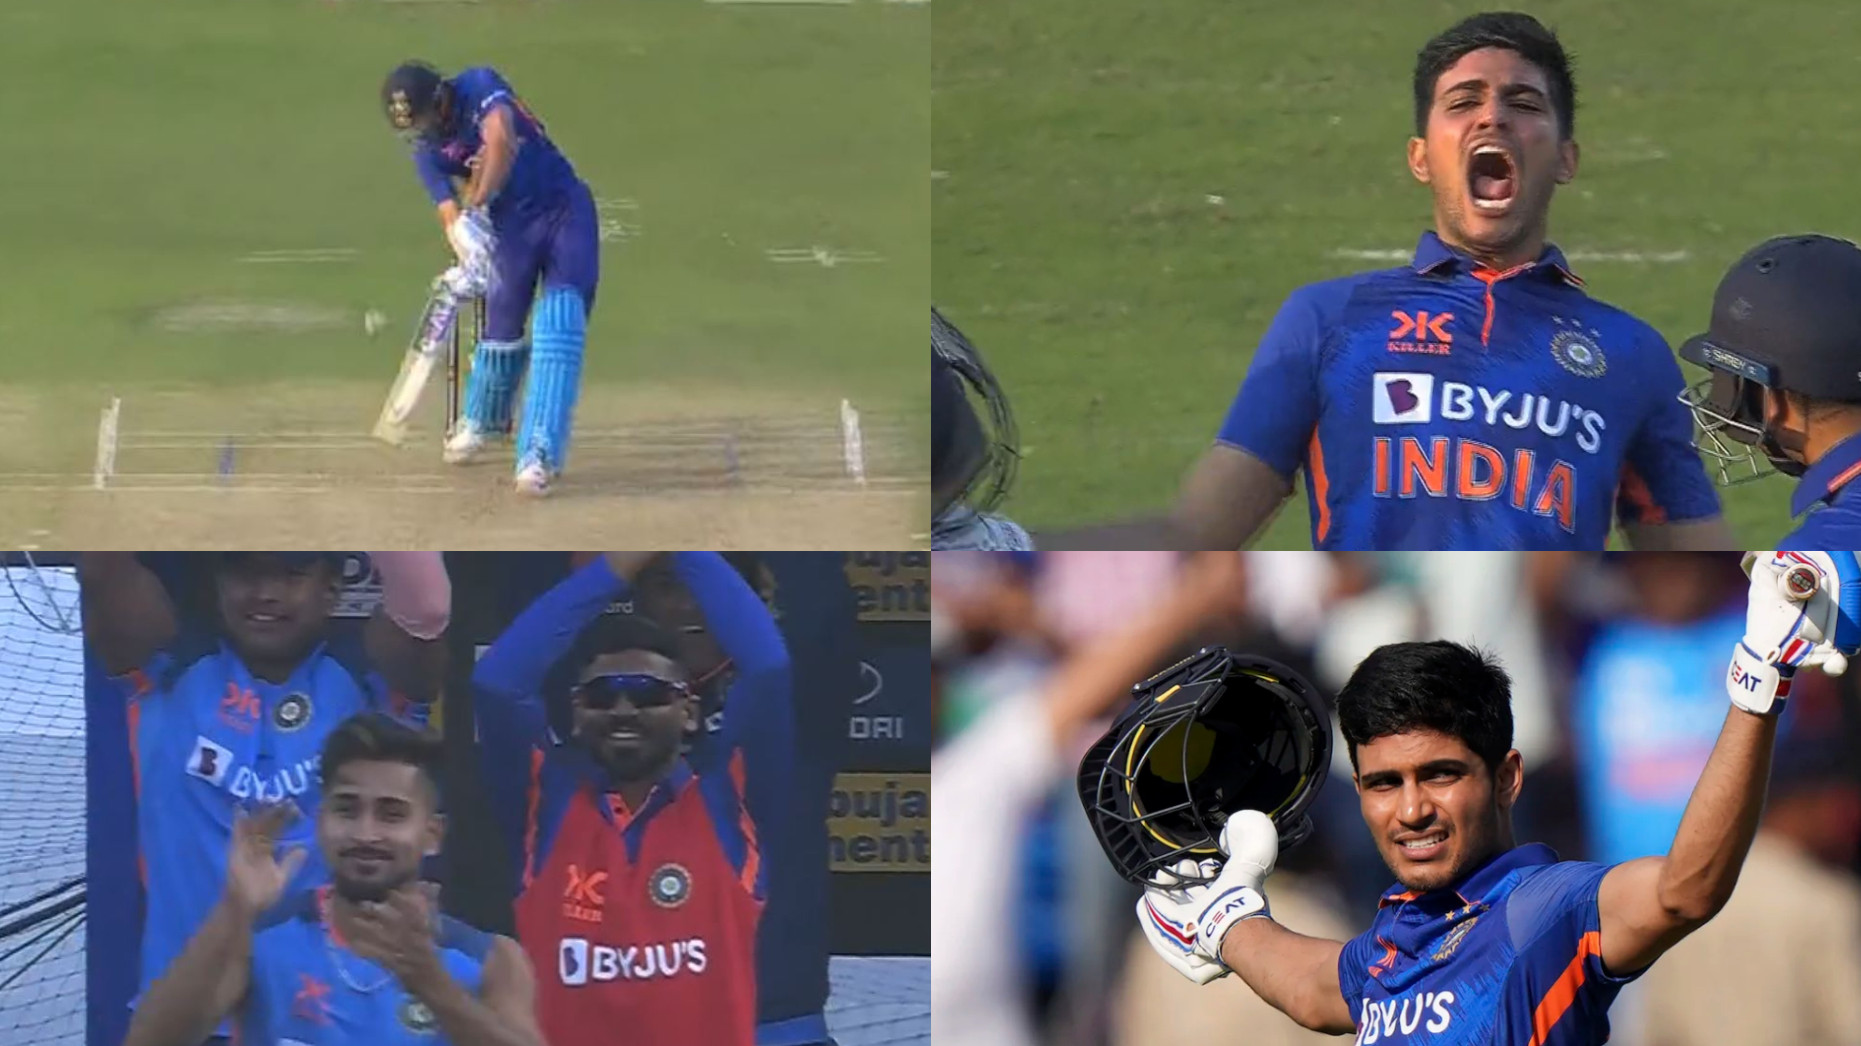 IND v NZ 2023: WATCH- Shubman Gill’s elated celebration on reaching double ton with a six; teammates applaud from dugout